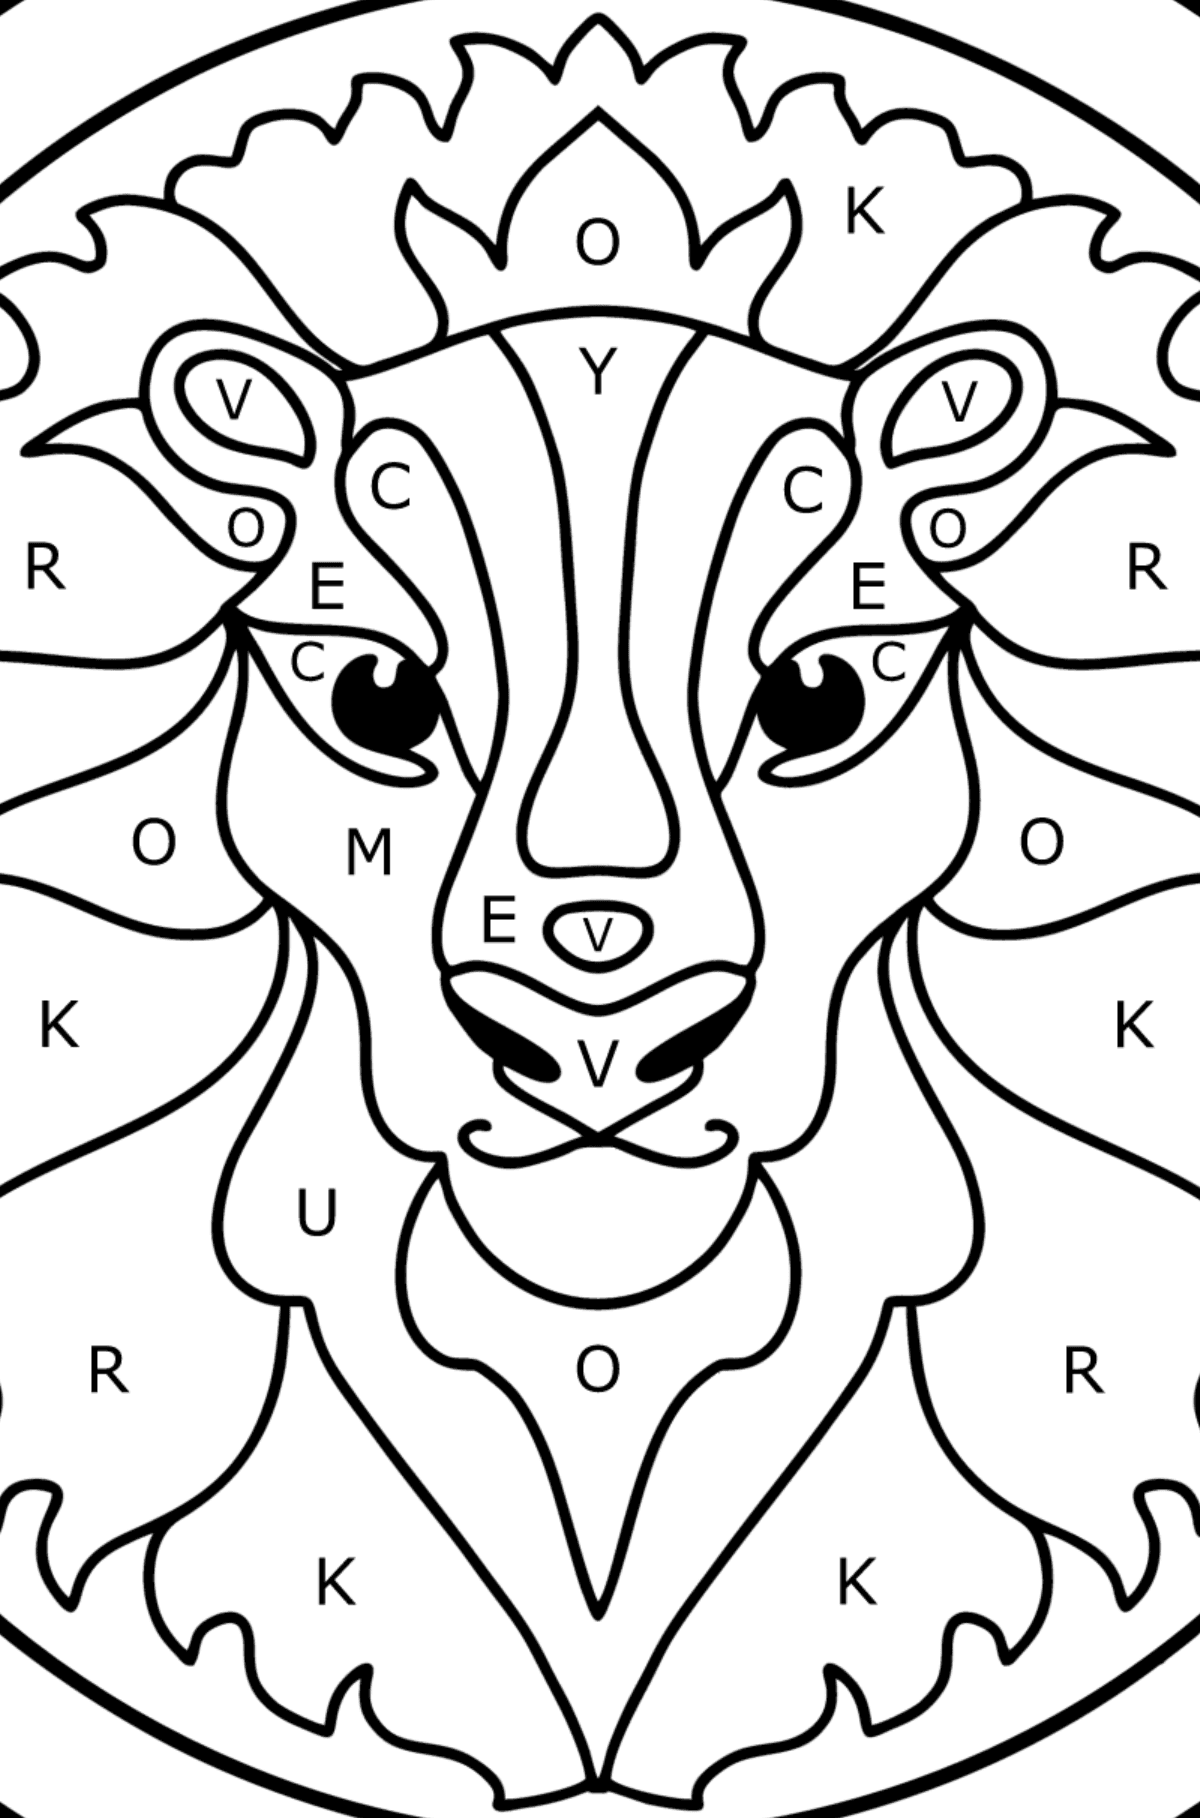 Coloring page for kids - zodiac sign Leo - Coloring by Letters for Kids